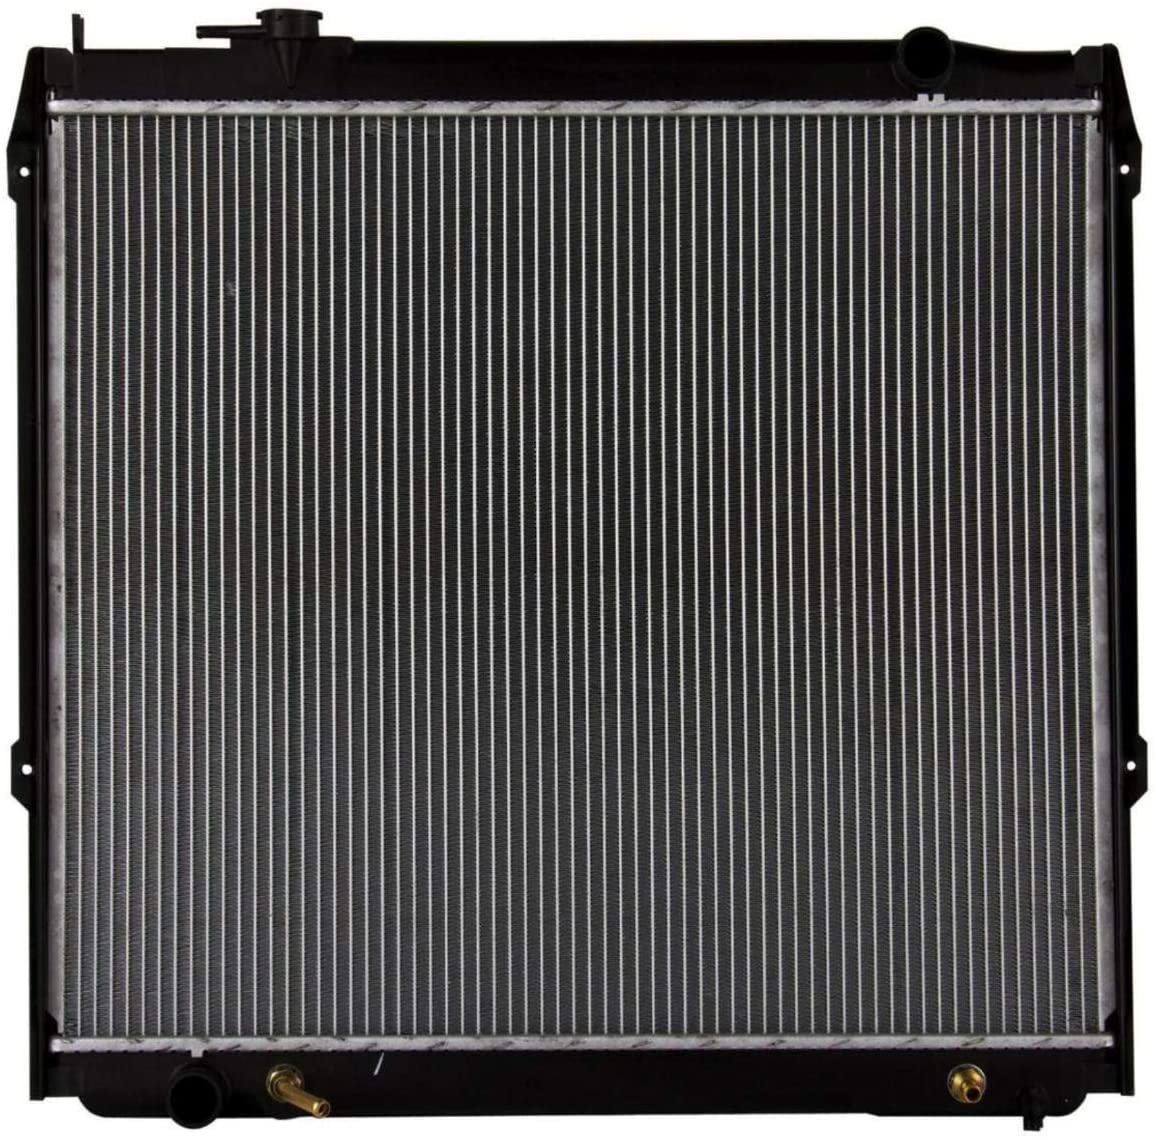 BreaAP 1pc Automatic 1 Row Automotive Radiator For CU1755